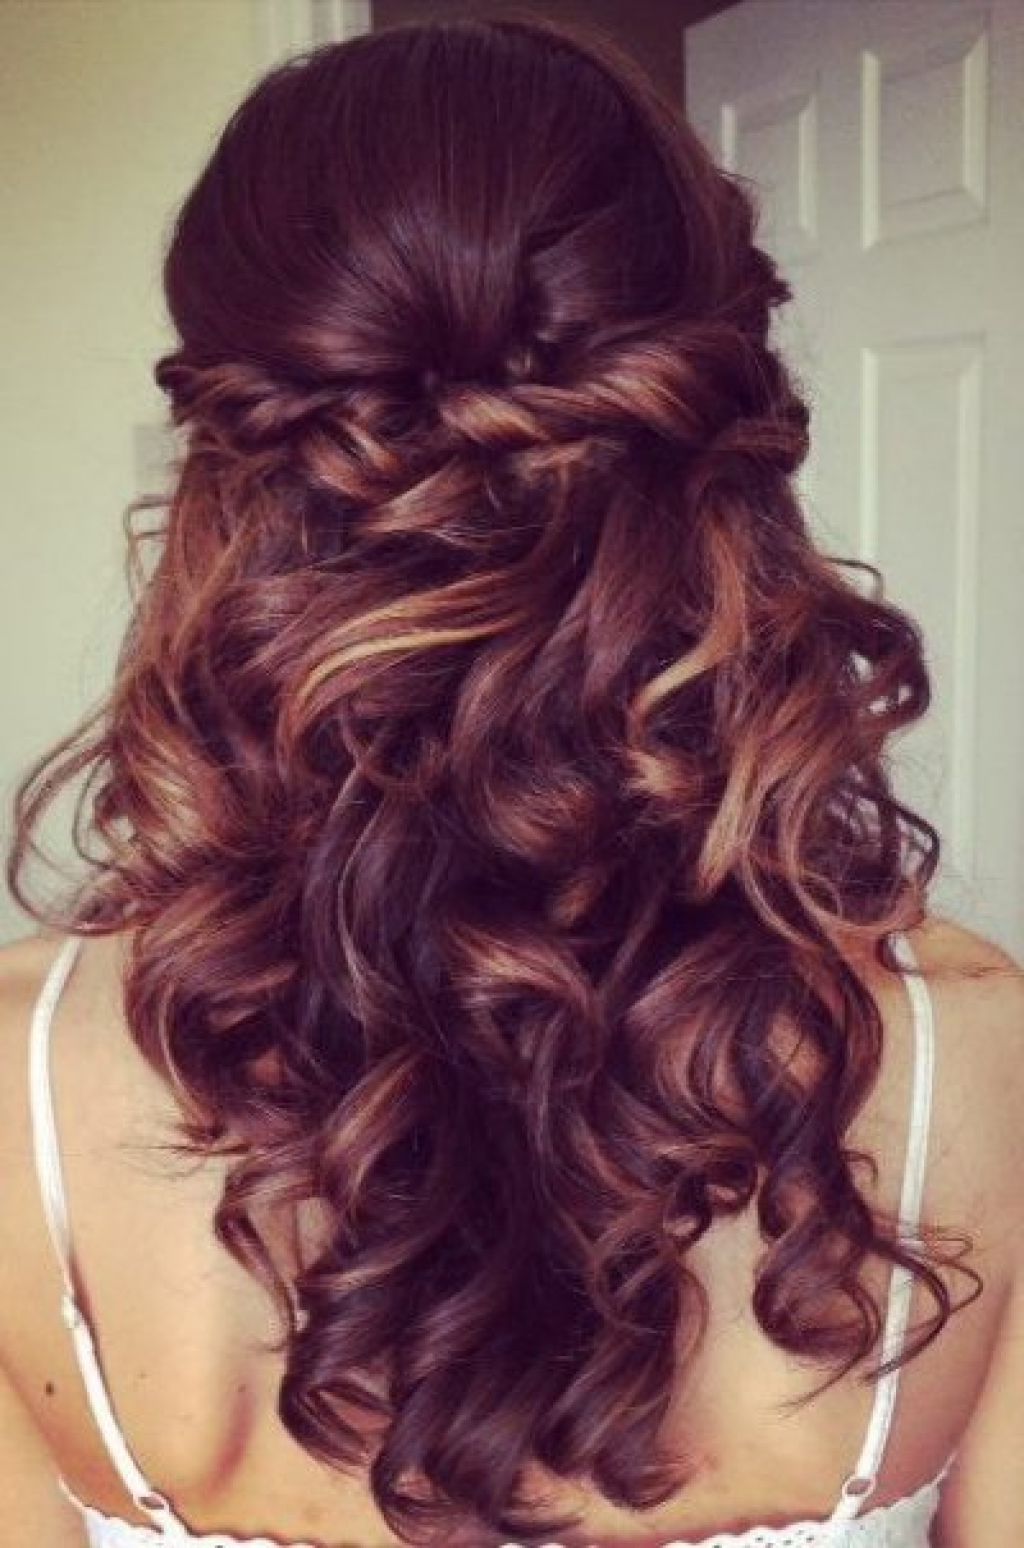 Elegant Curly Half Updo Prom Hairstyle With Bouncy Long Curls Throughout Elegant Half Updo Hairstyles (View 1 of 15)